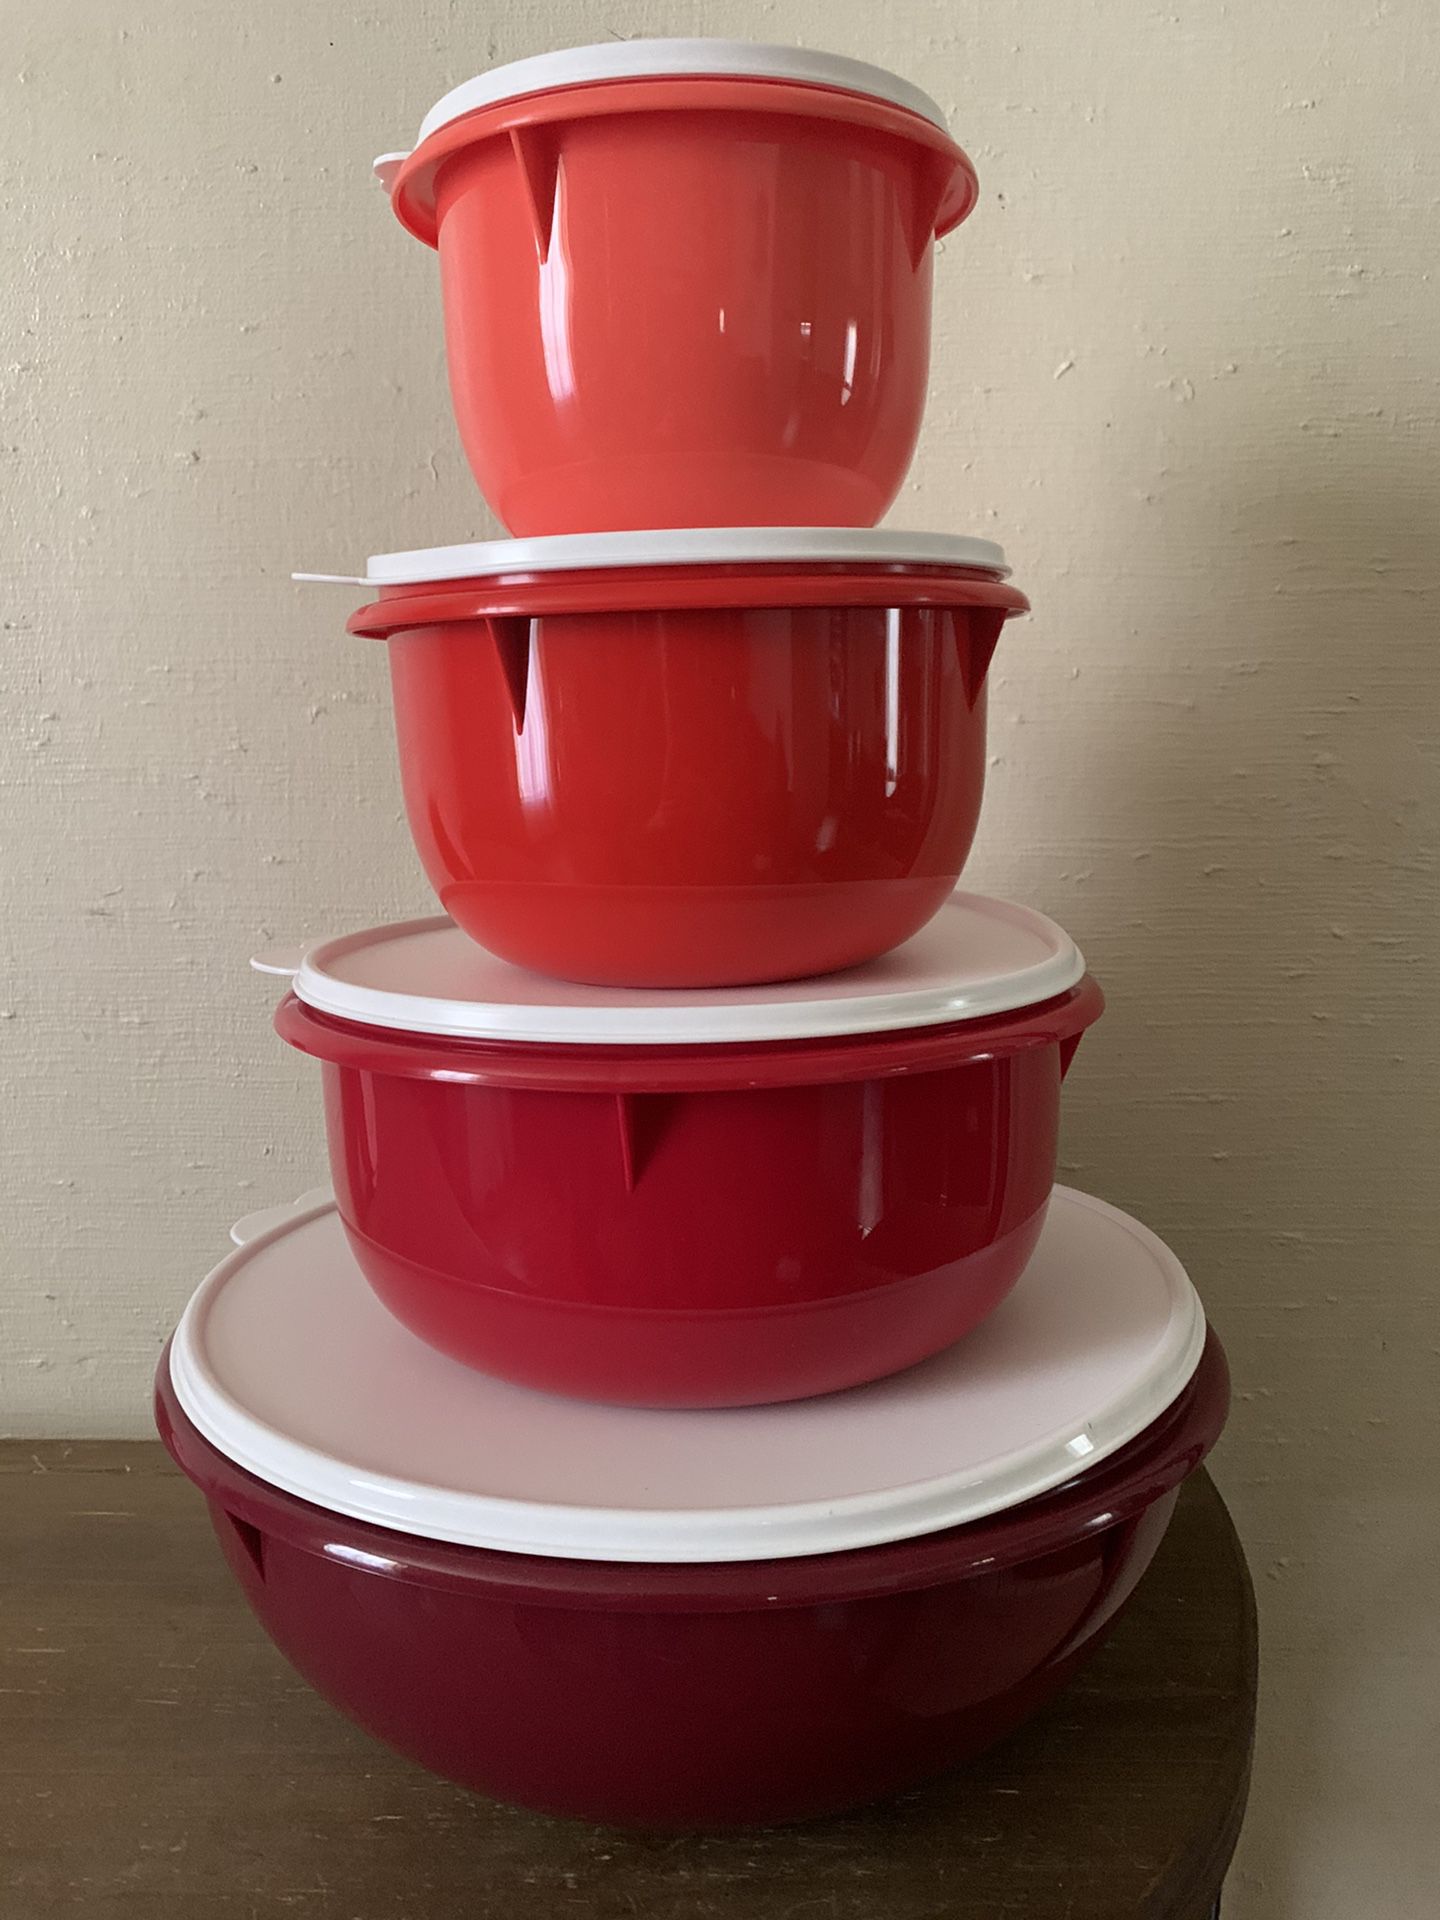 Mixing bowl 4 pcs ${link removed}.tupperware. Pick up only San Jose